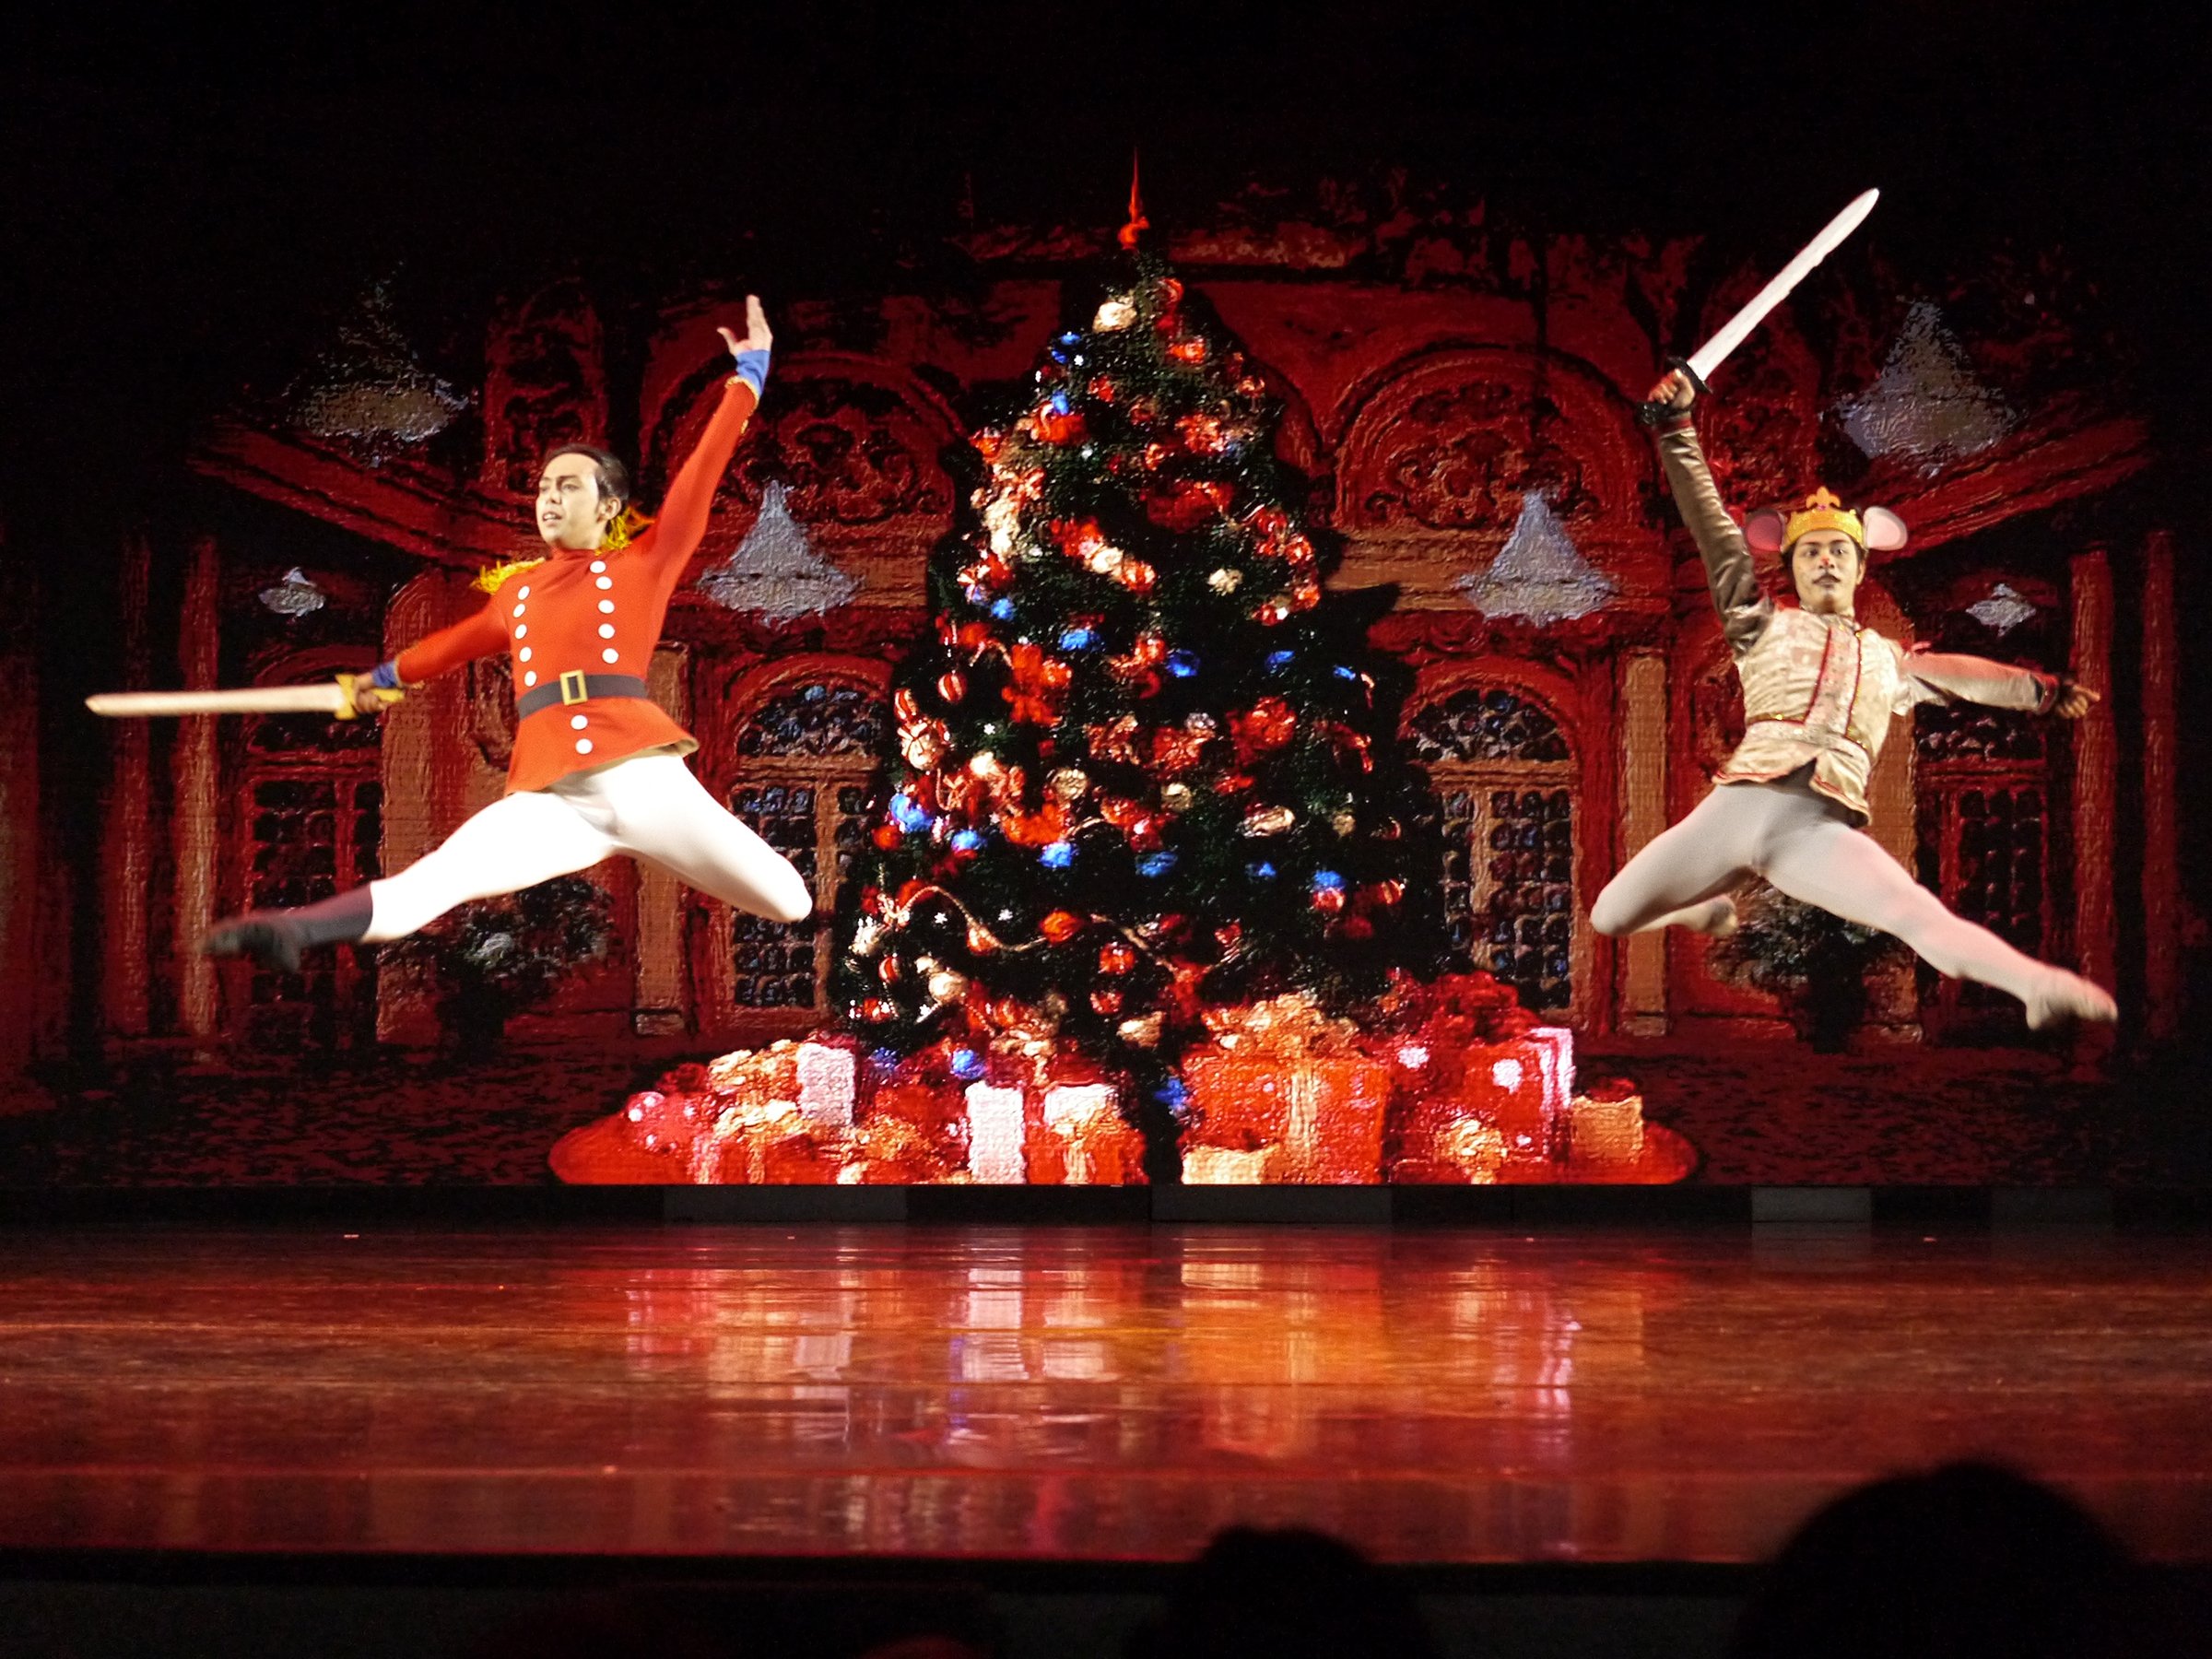    The Nutcracker Prince (Sean Pelegrin) and the Mouse King (Anselmo Dictado) battle it out in one of the ballet’s iconic scenes.   